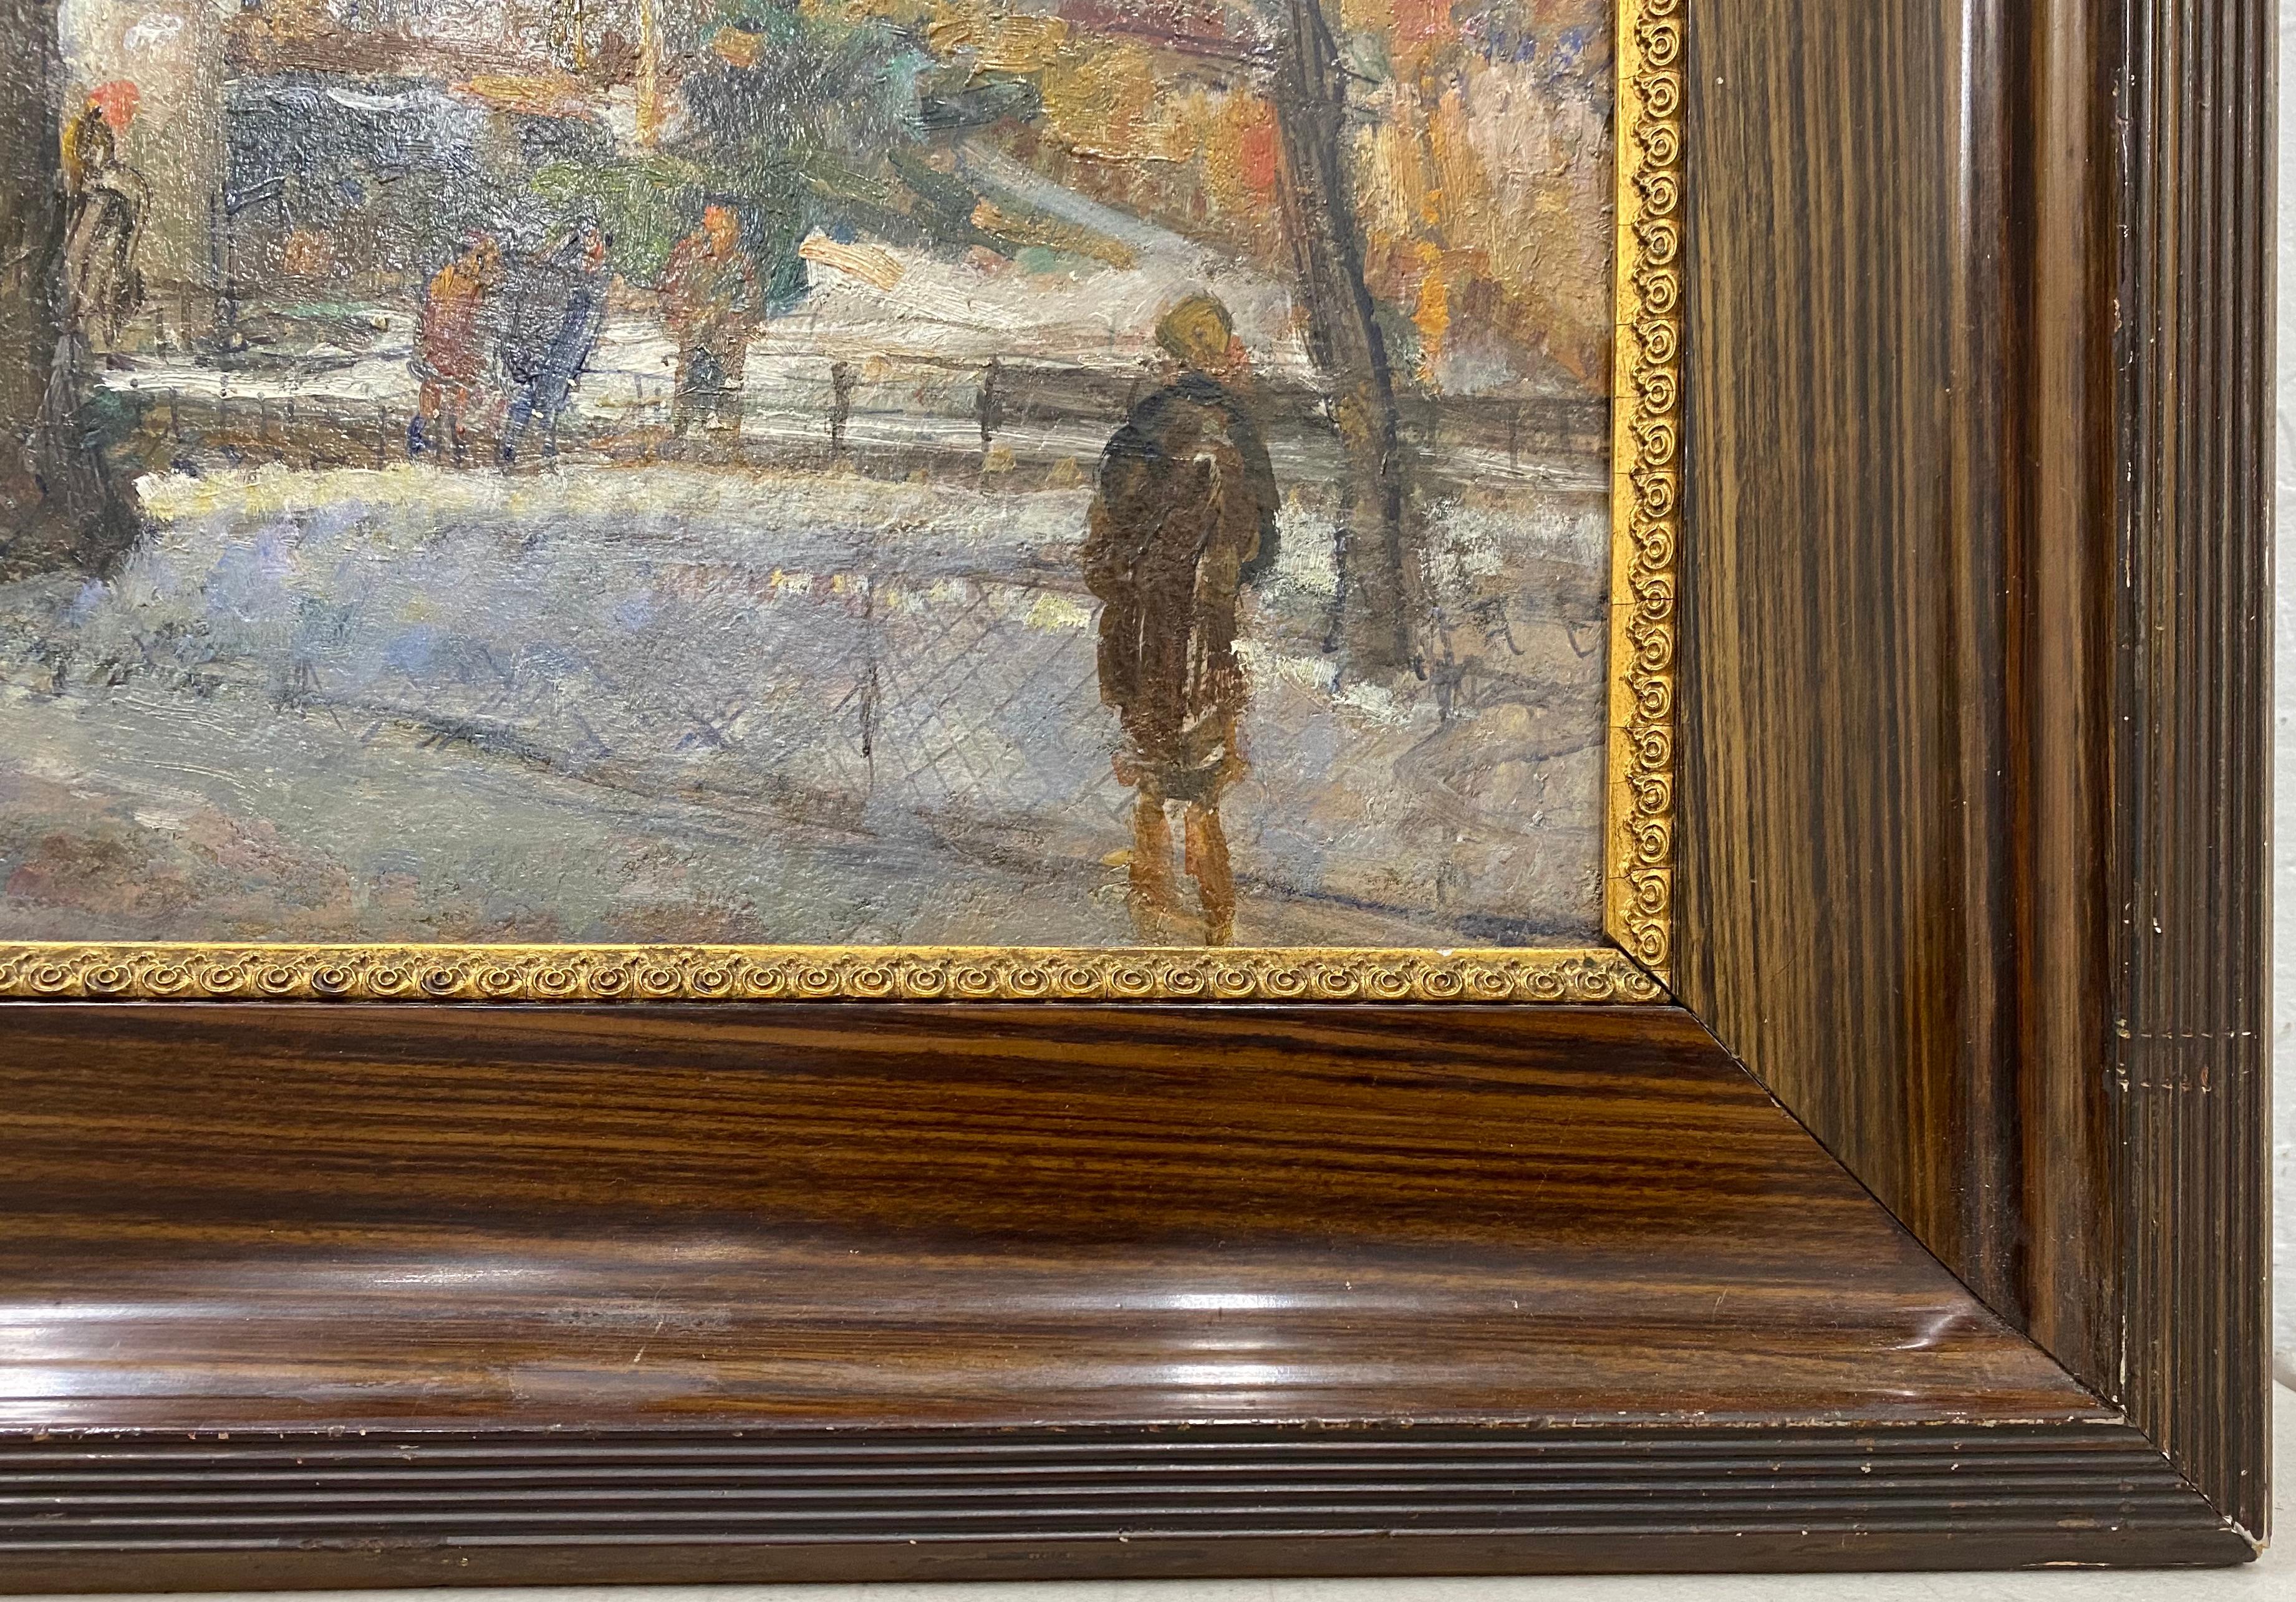 Early 20th Century Impressionist Oil Painting C.1920

Original oil on board

Dimensions 16